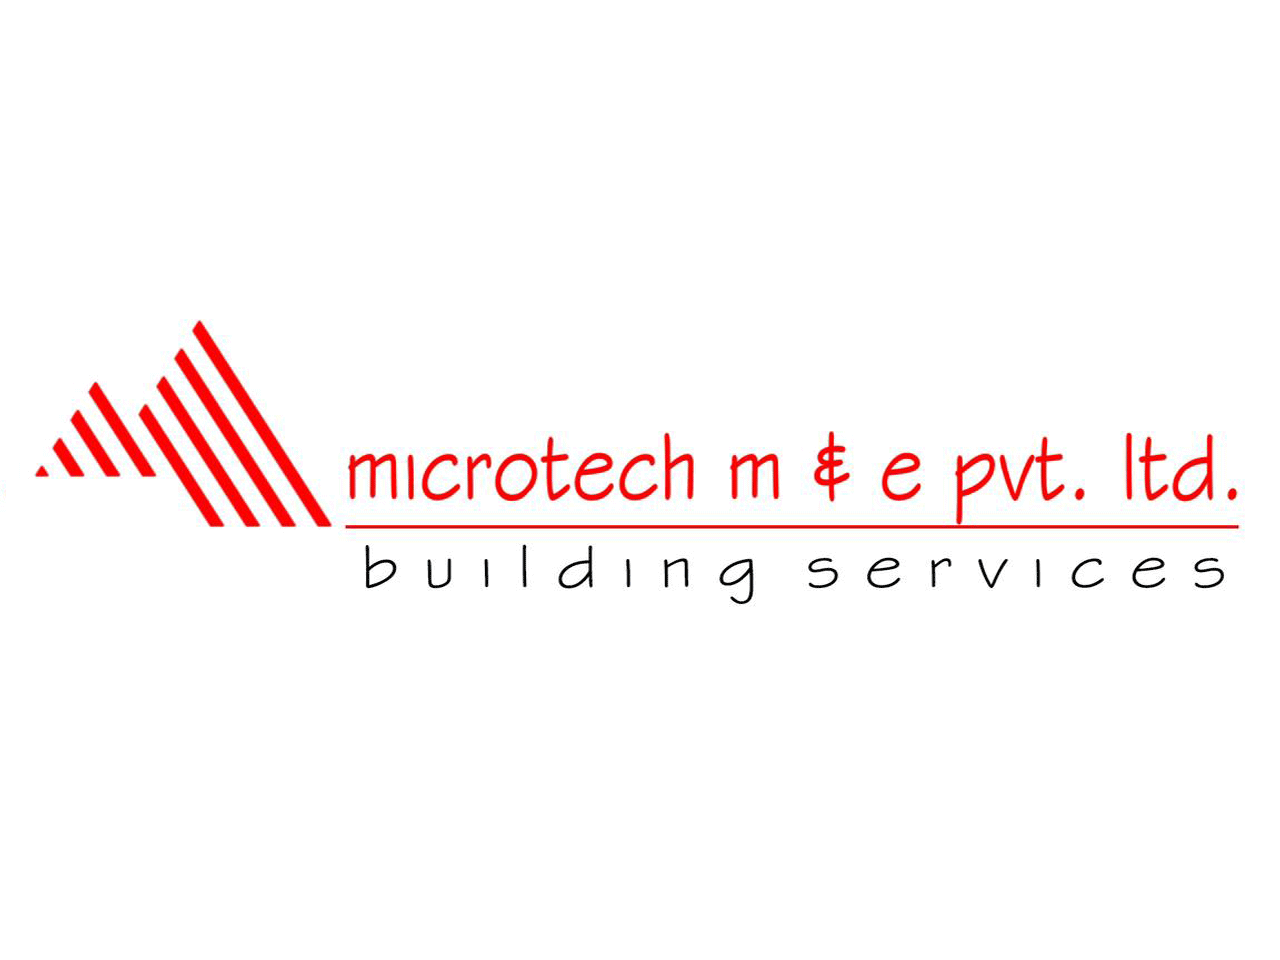 Microtech m&e Commences MEP Work on Singha durbar Main Administrative Building (Prime Minister Office)